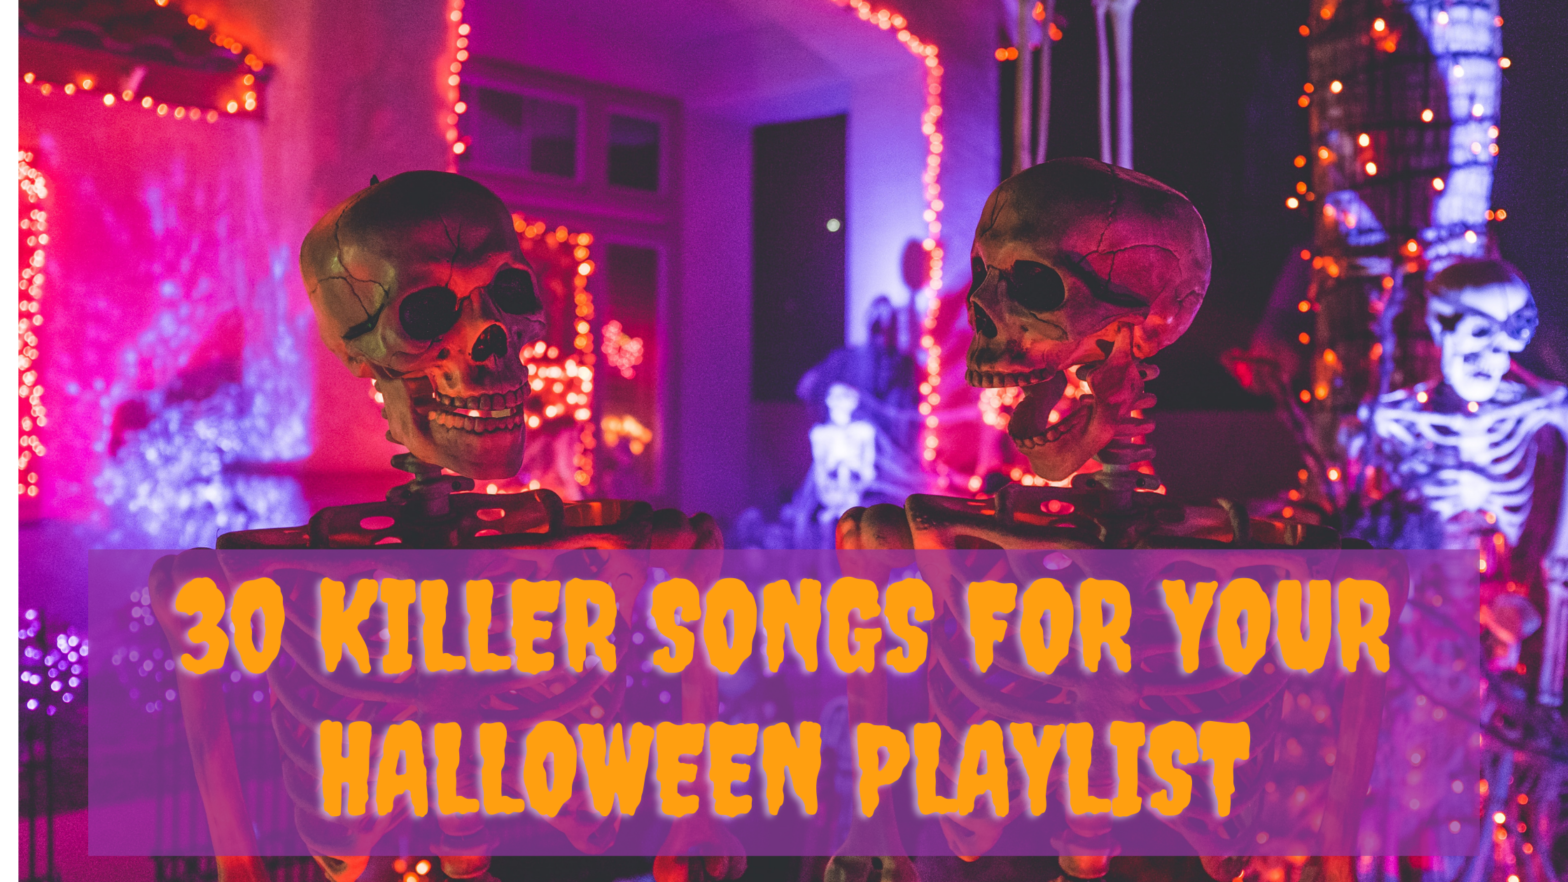 Two Skeletons and Lights, Title 30 Killer Songs For Your Halloween Playlist